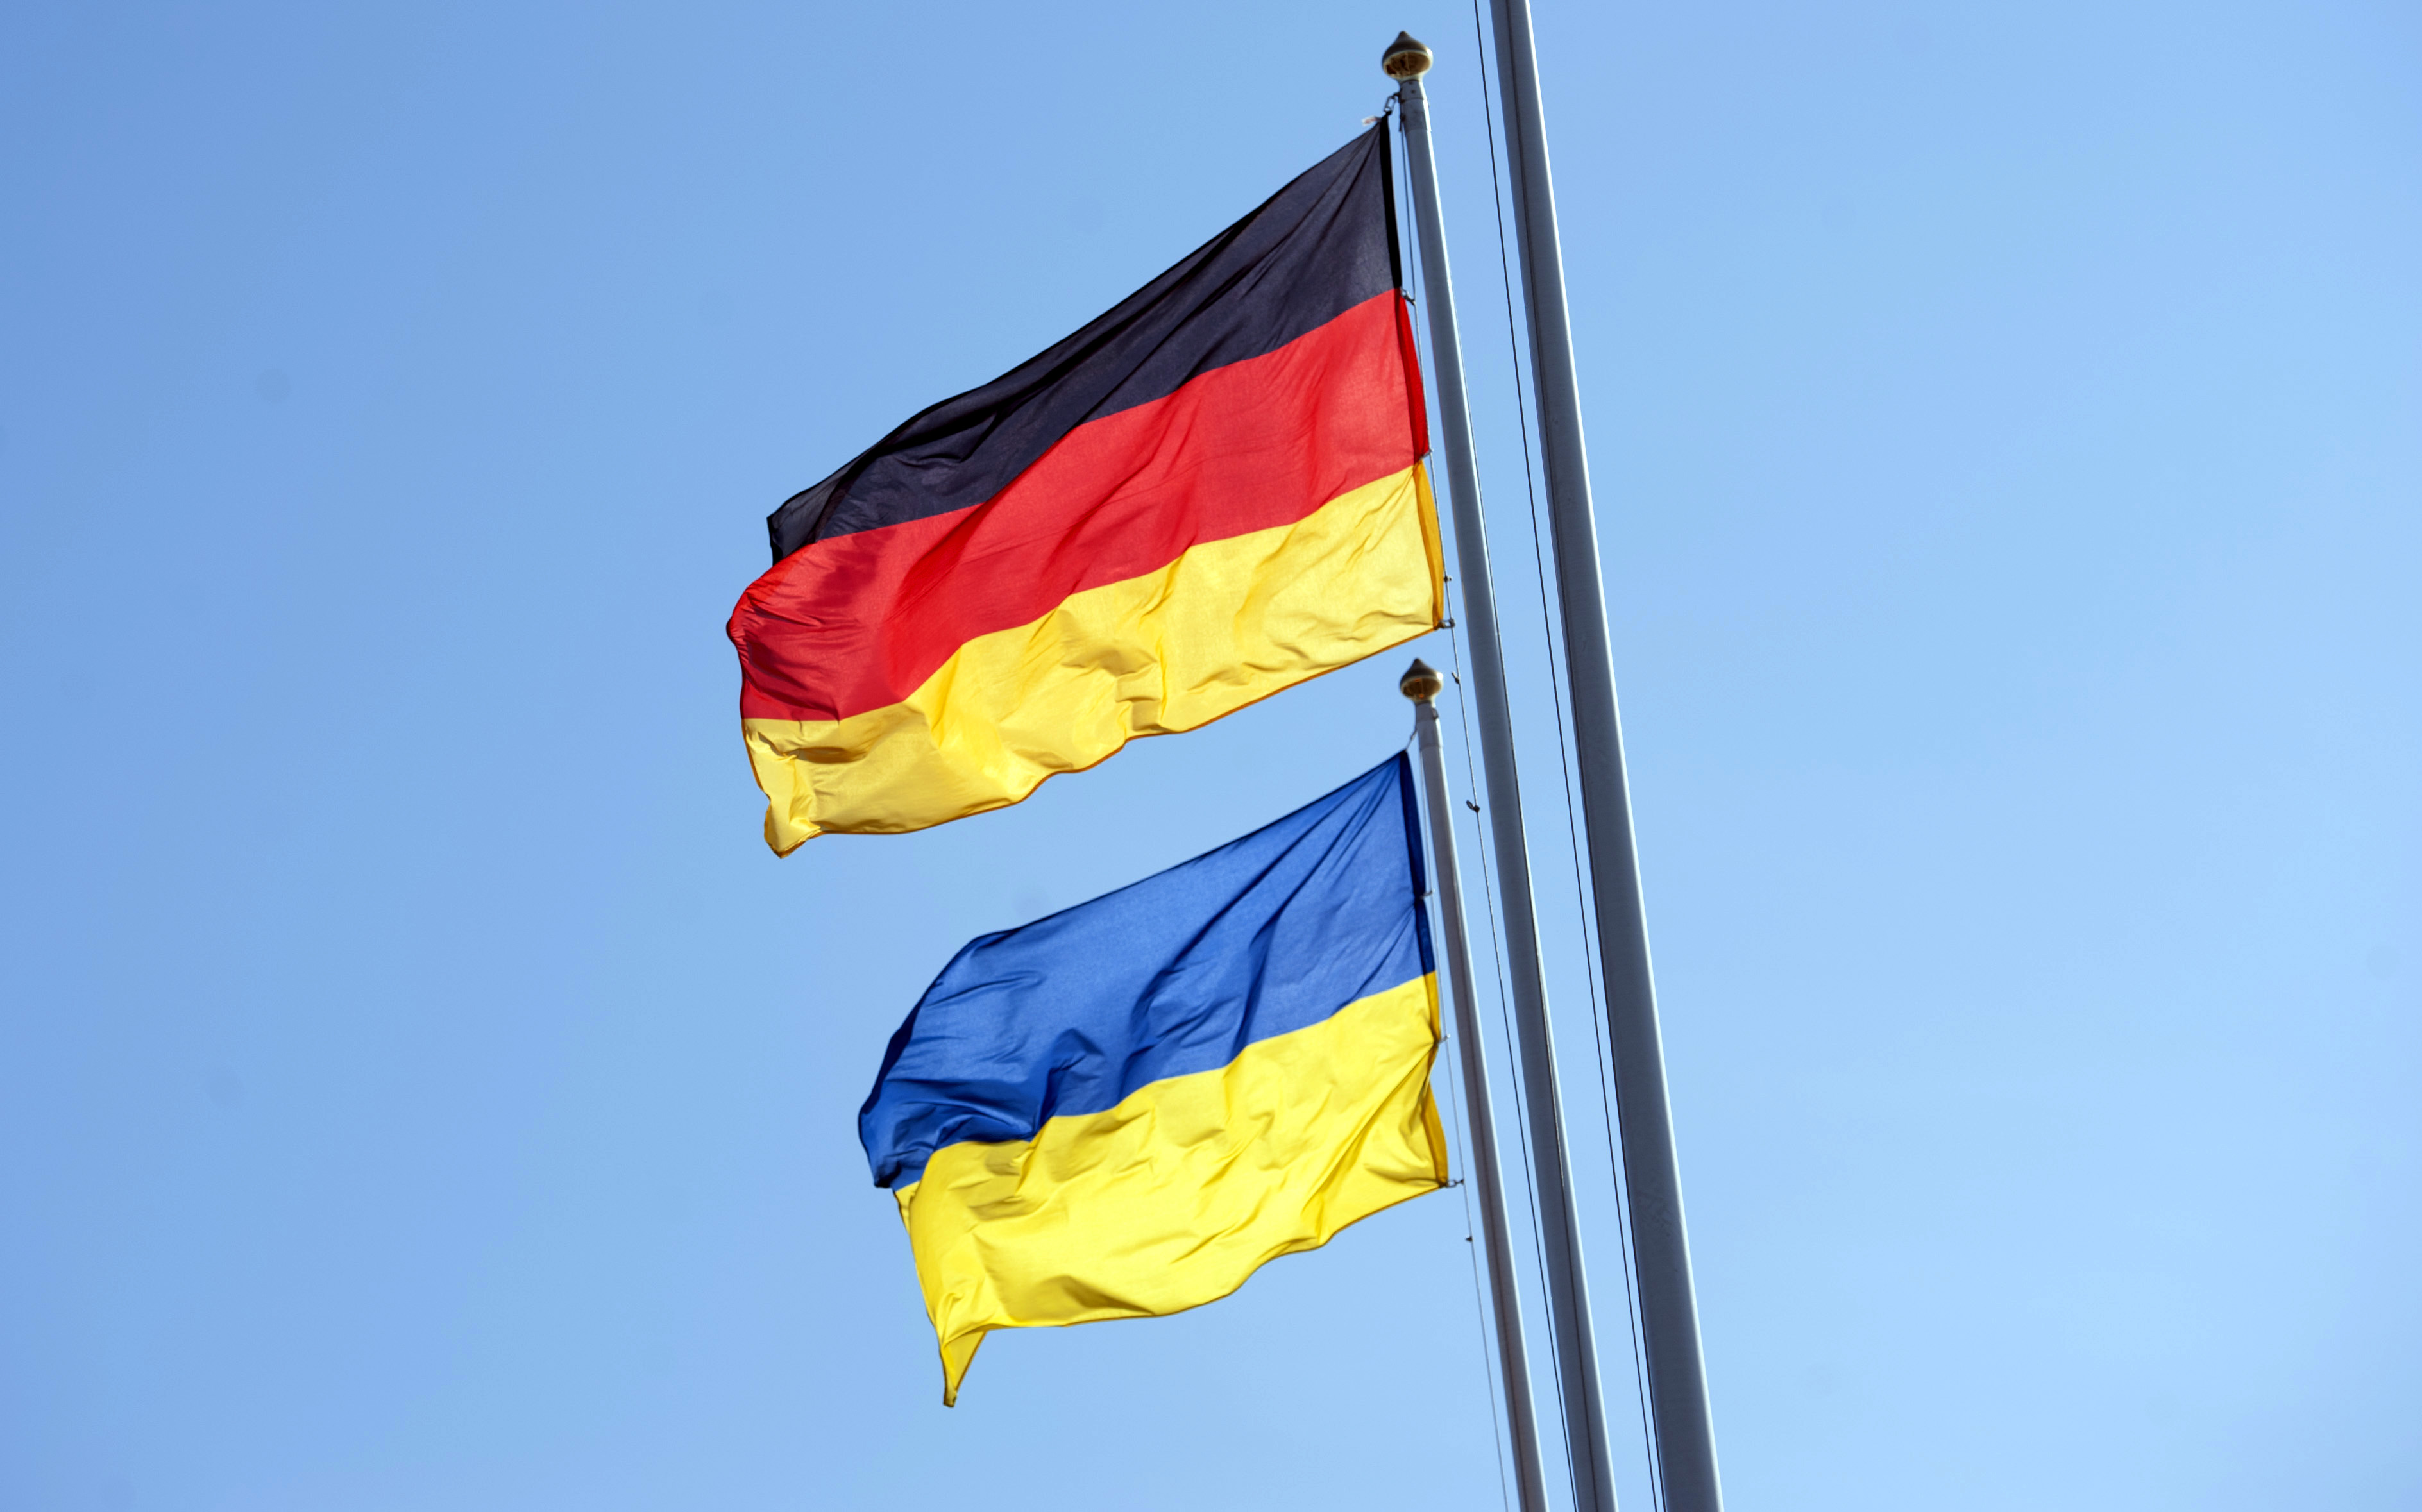 The flags of Germany and Ukraine